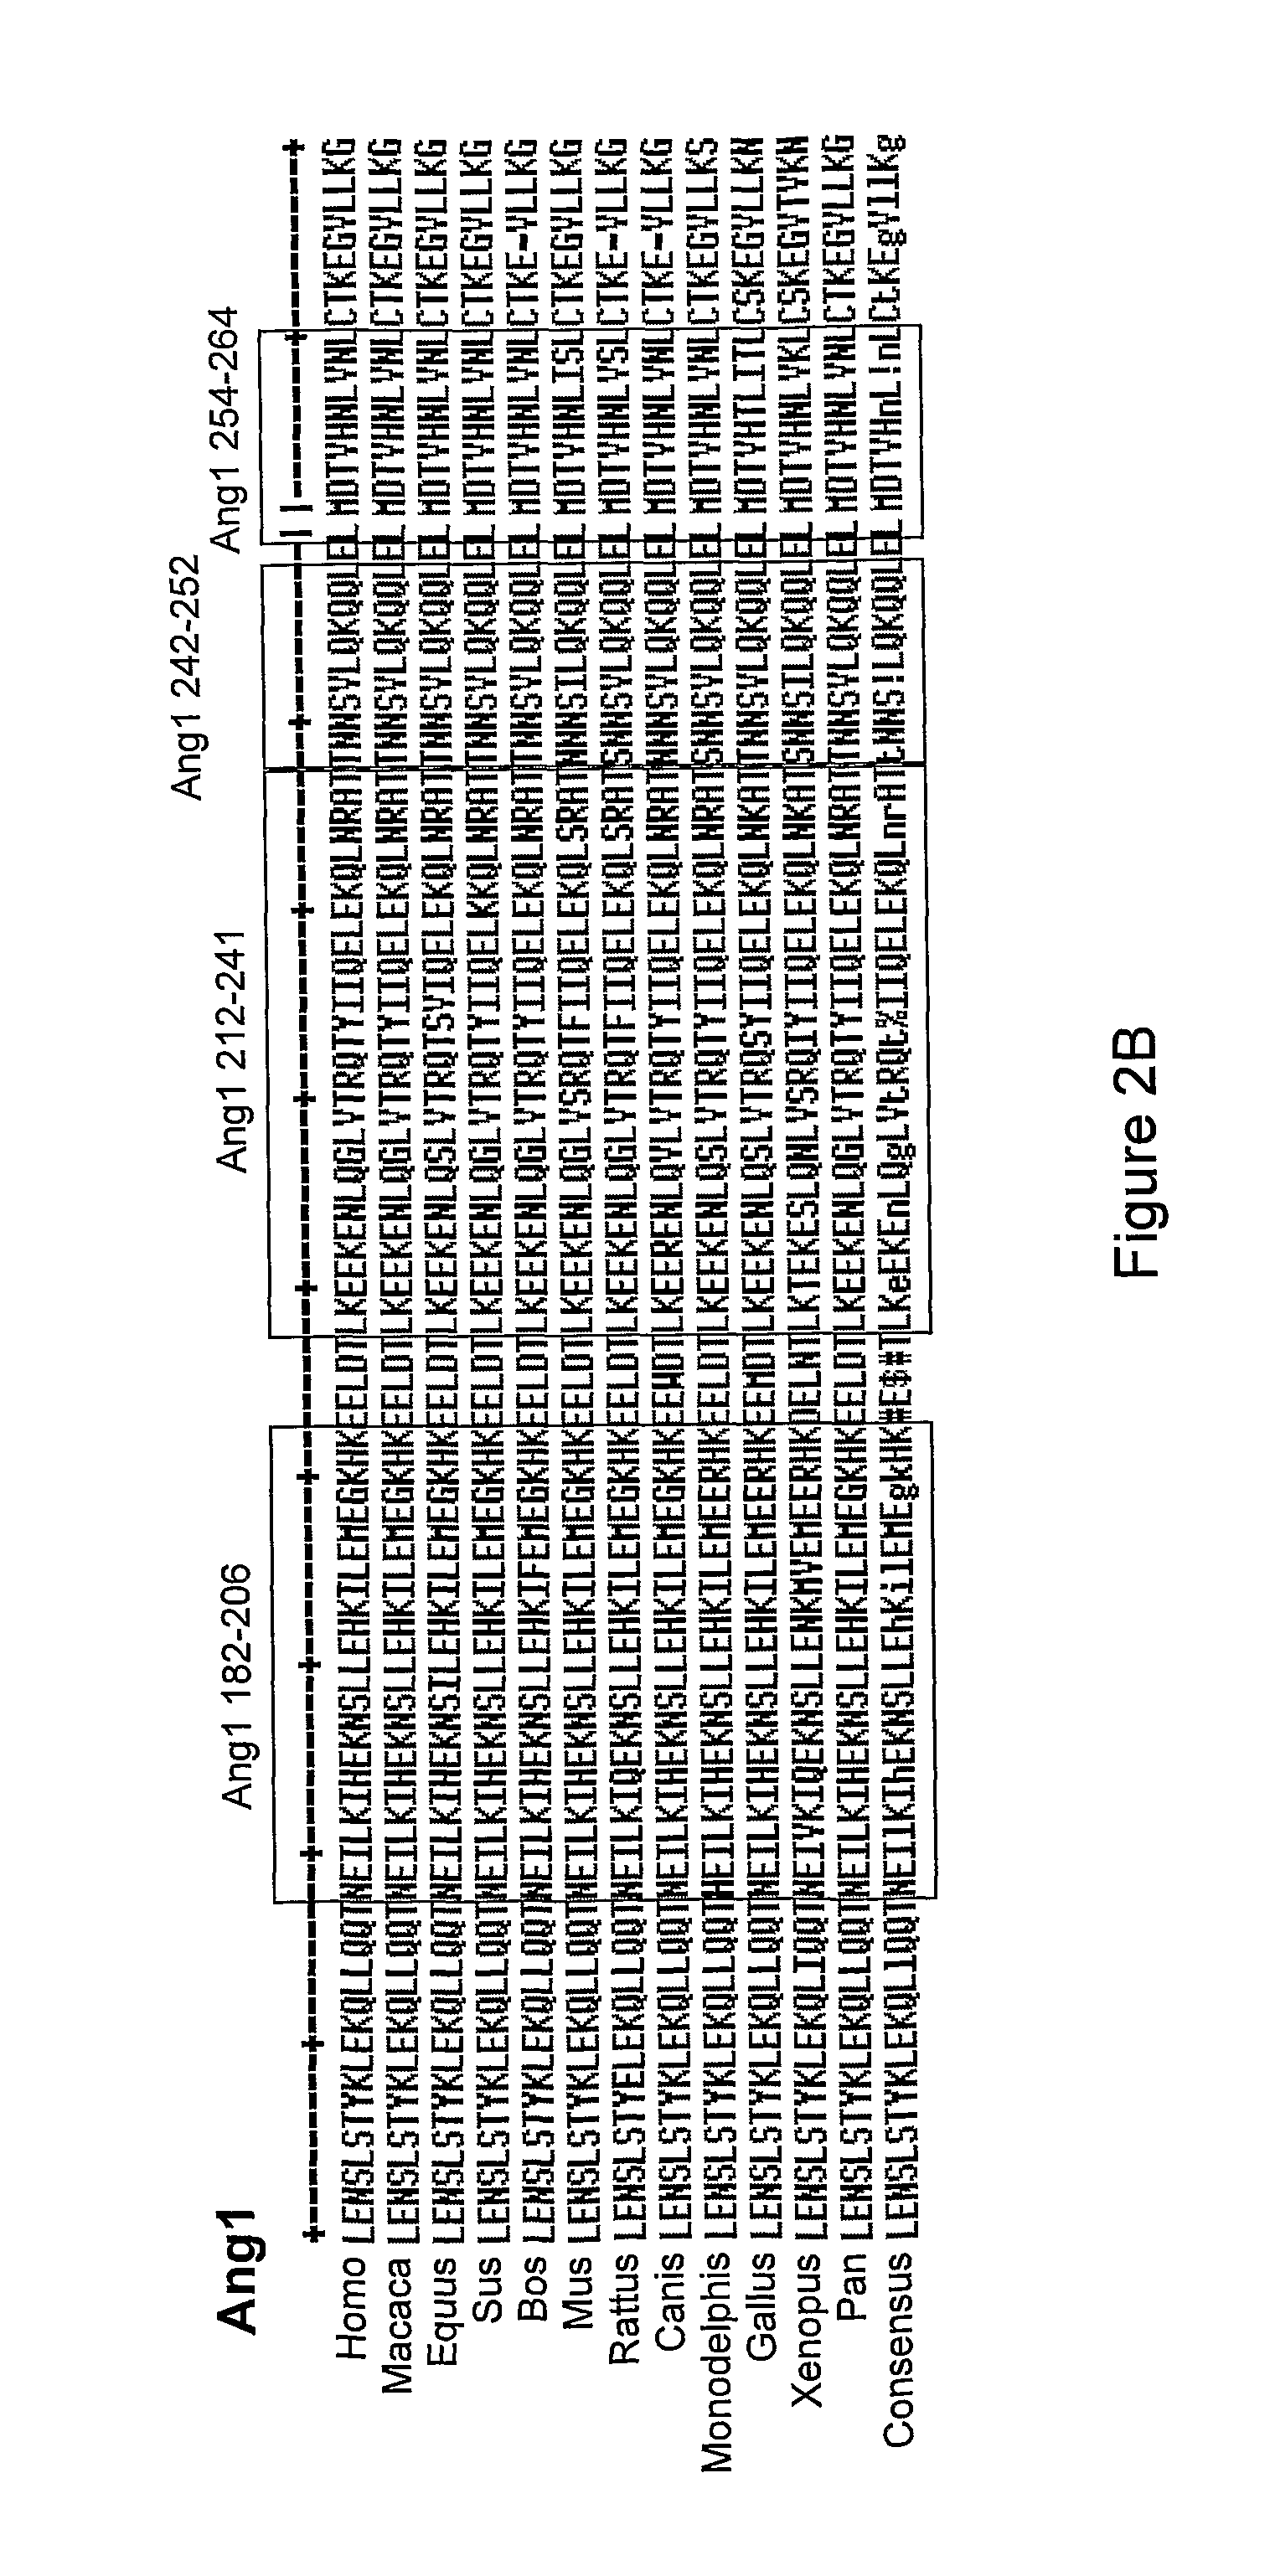 Angiopoietin derived peptides